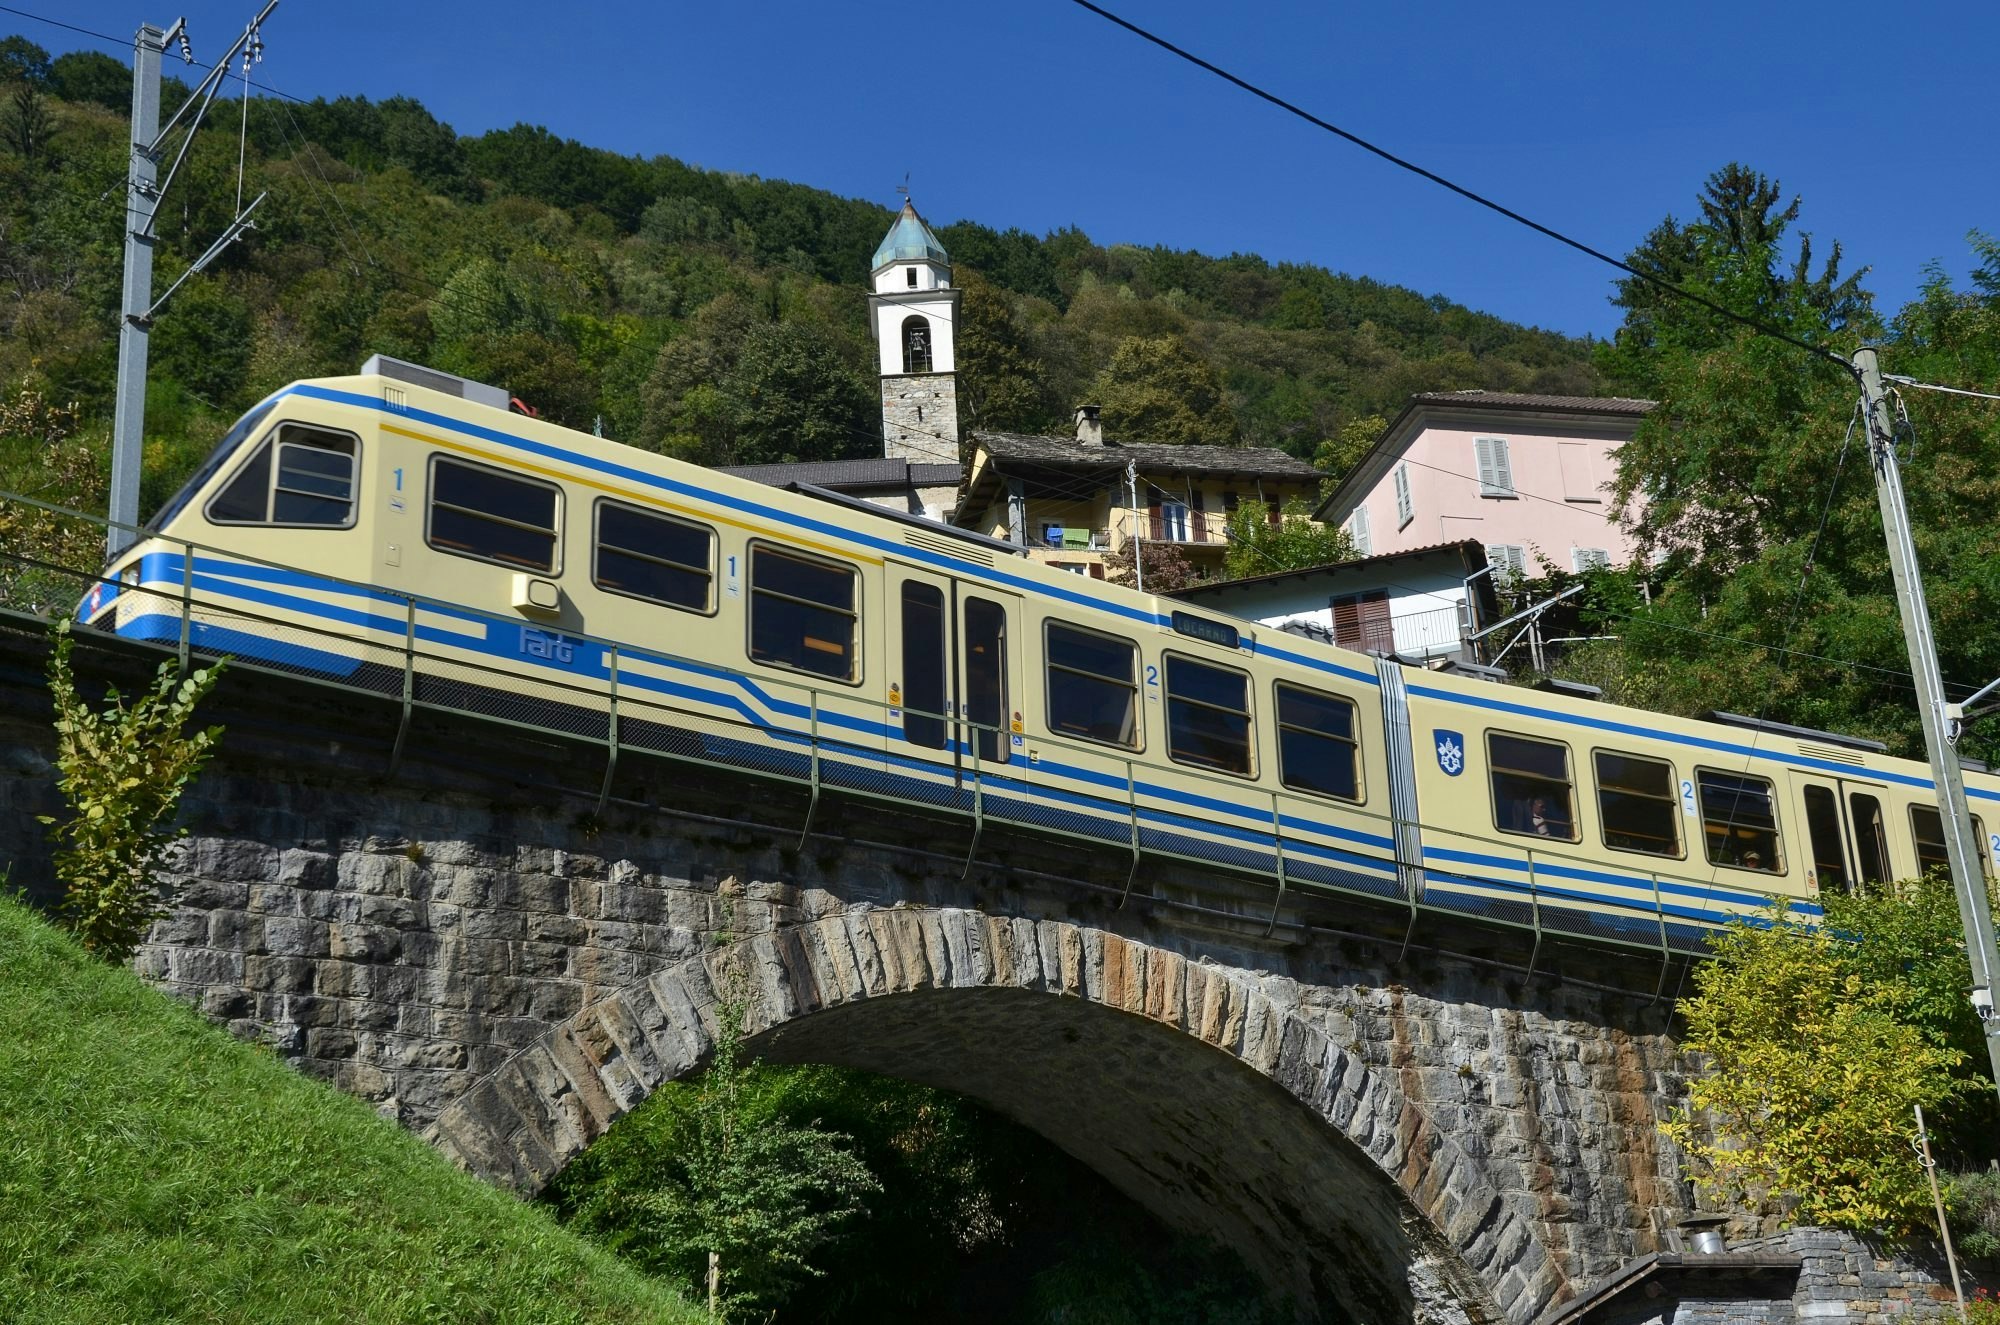 Centovalli means Hundred Valleys, The scenic train called Centovallina that joins Domodossola in Italy and Locarno in Switzerland.